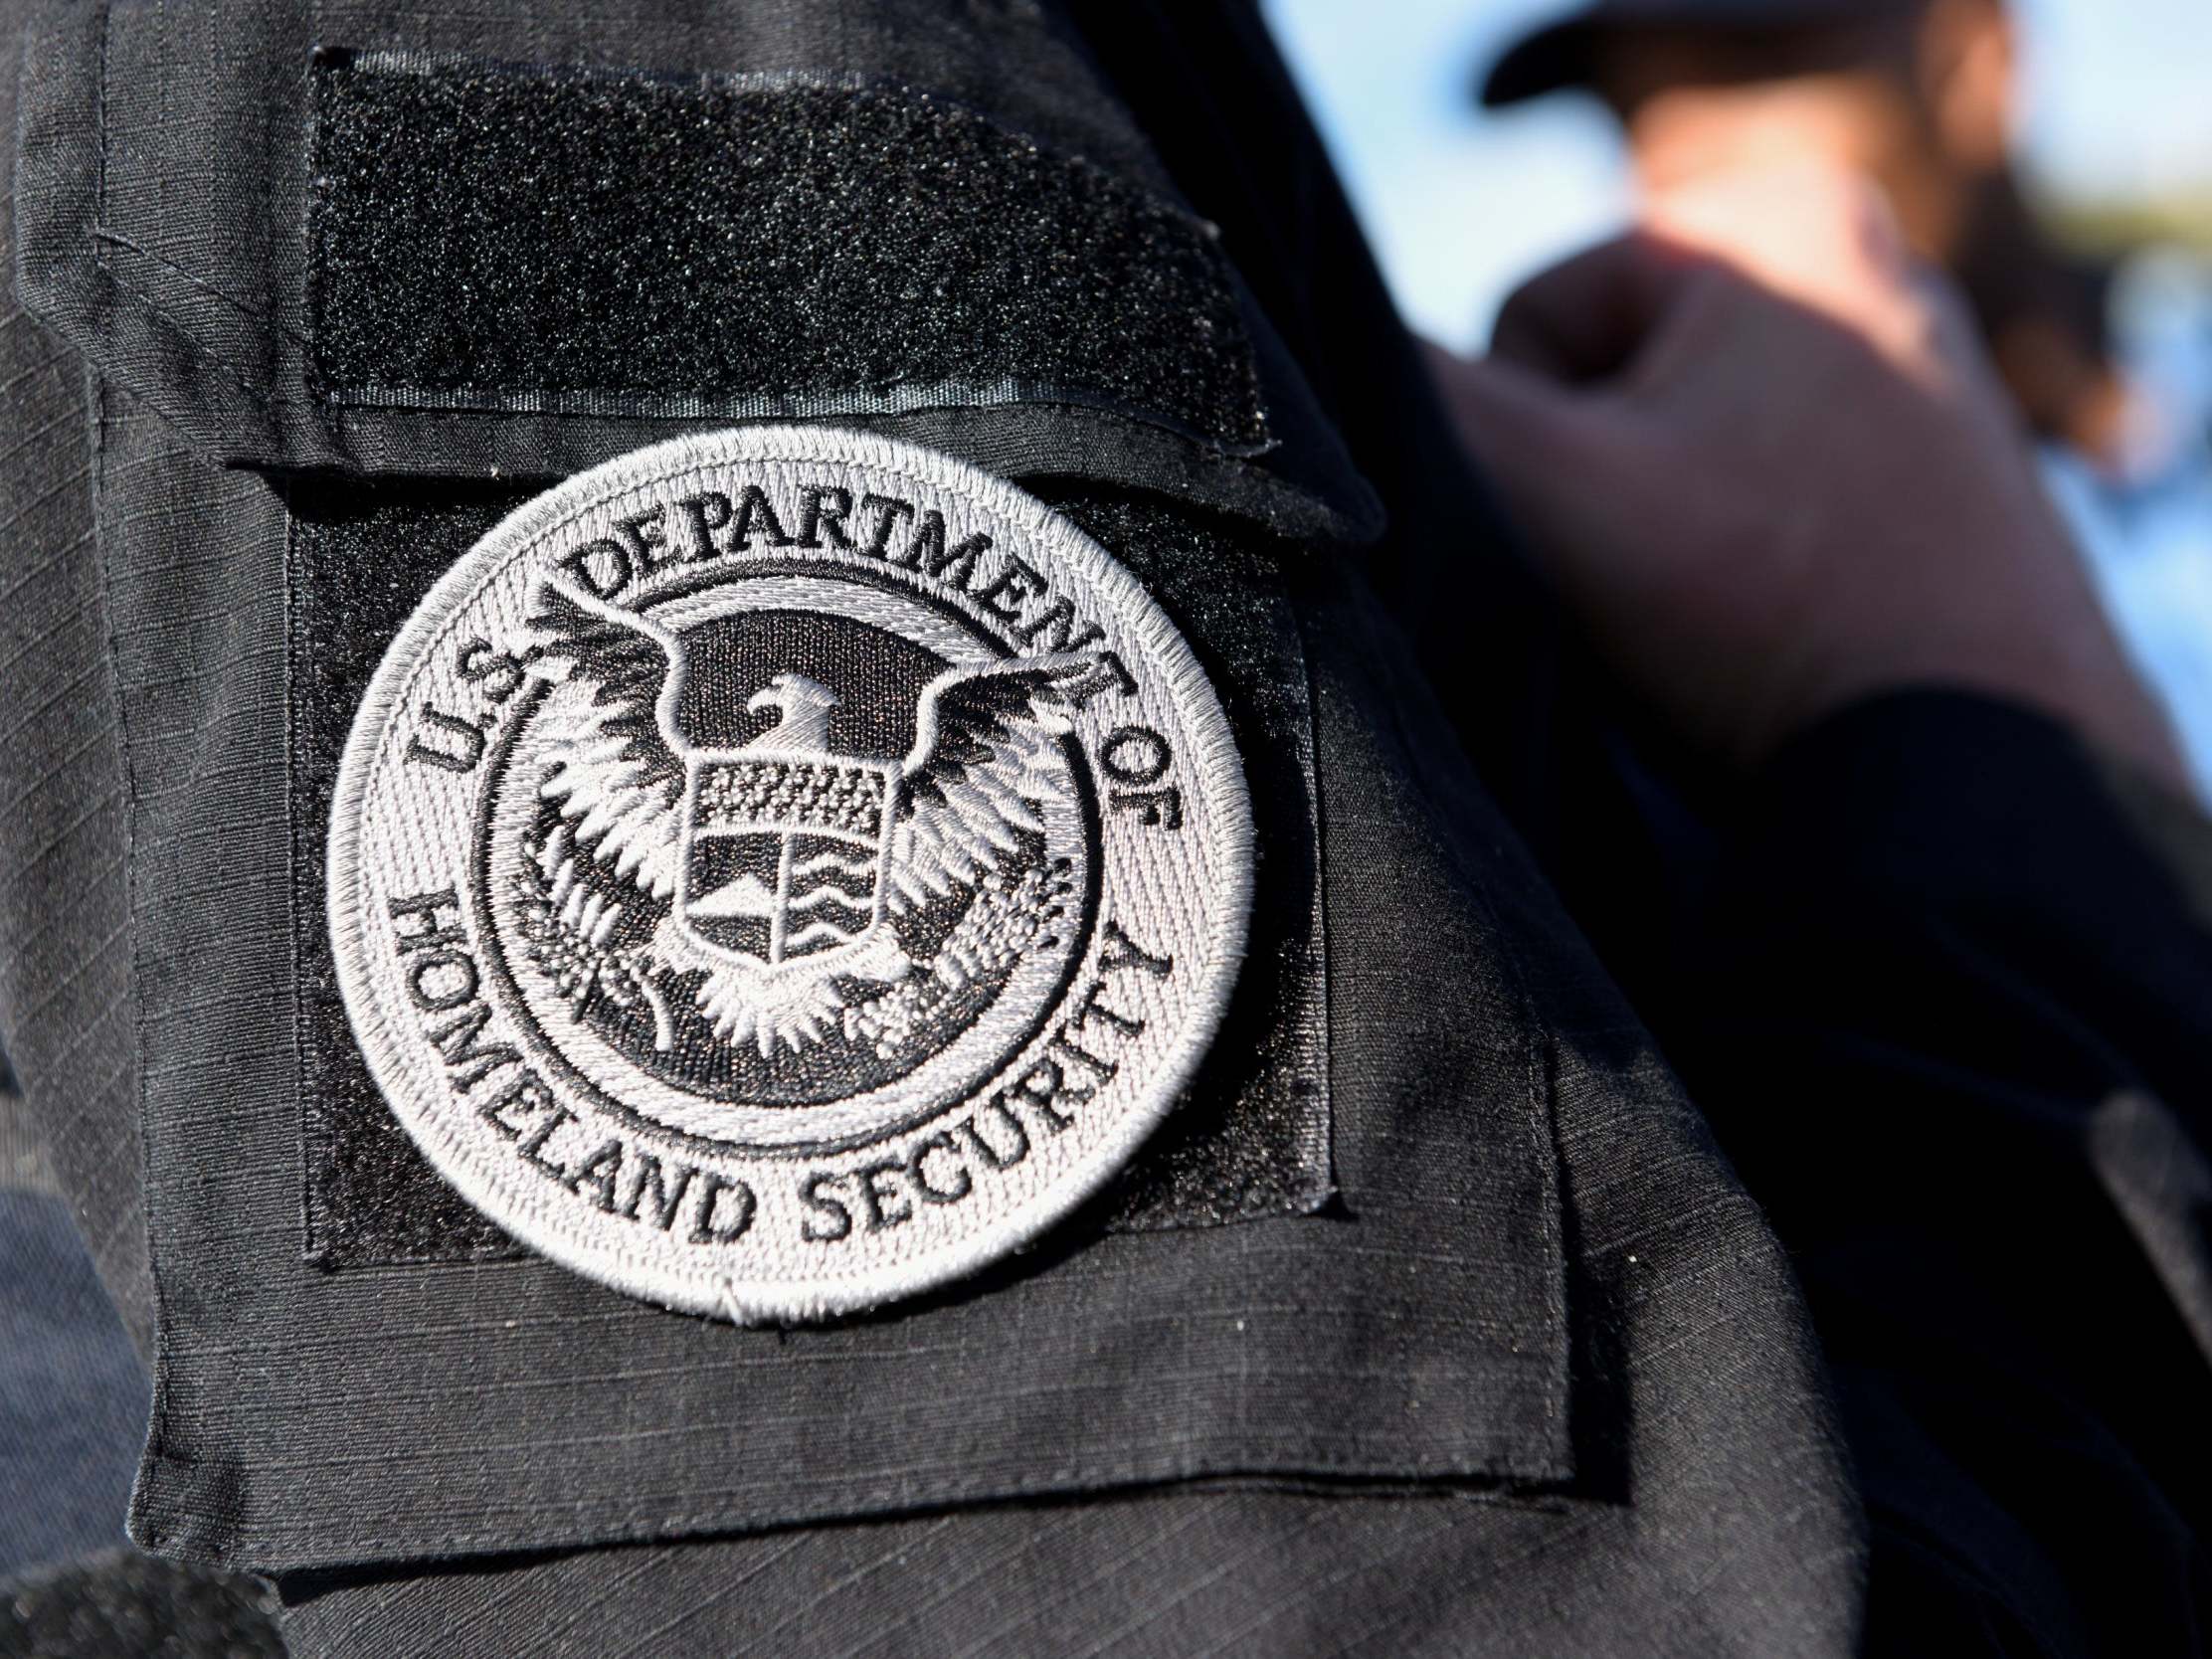 Lawsuit names US Department of Homeland Security and Immigration and Customs Enforcement, seeking $10 million in damages